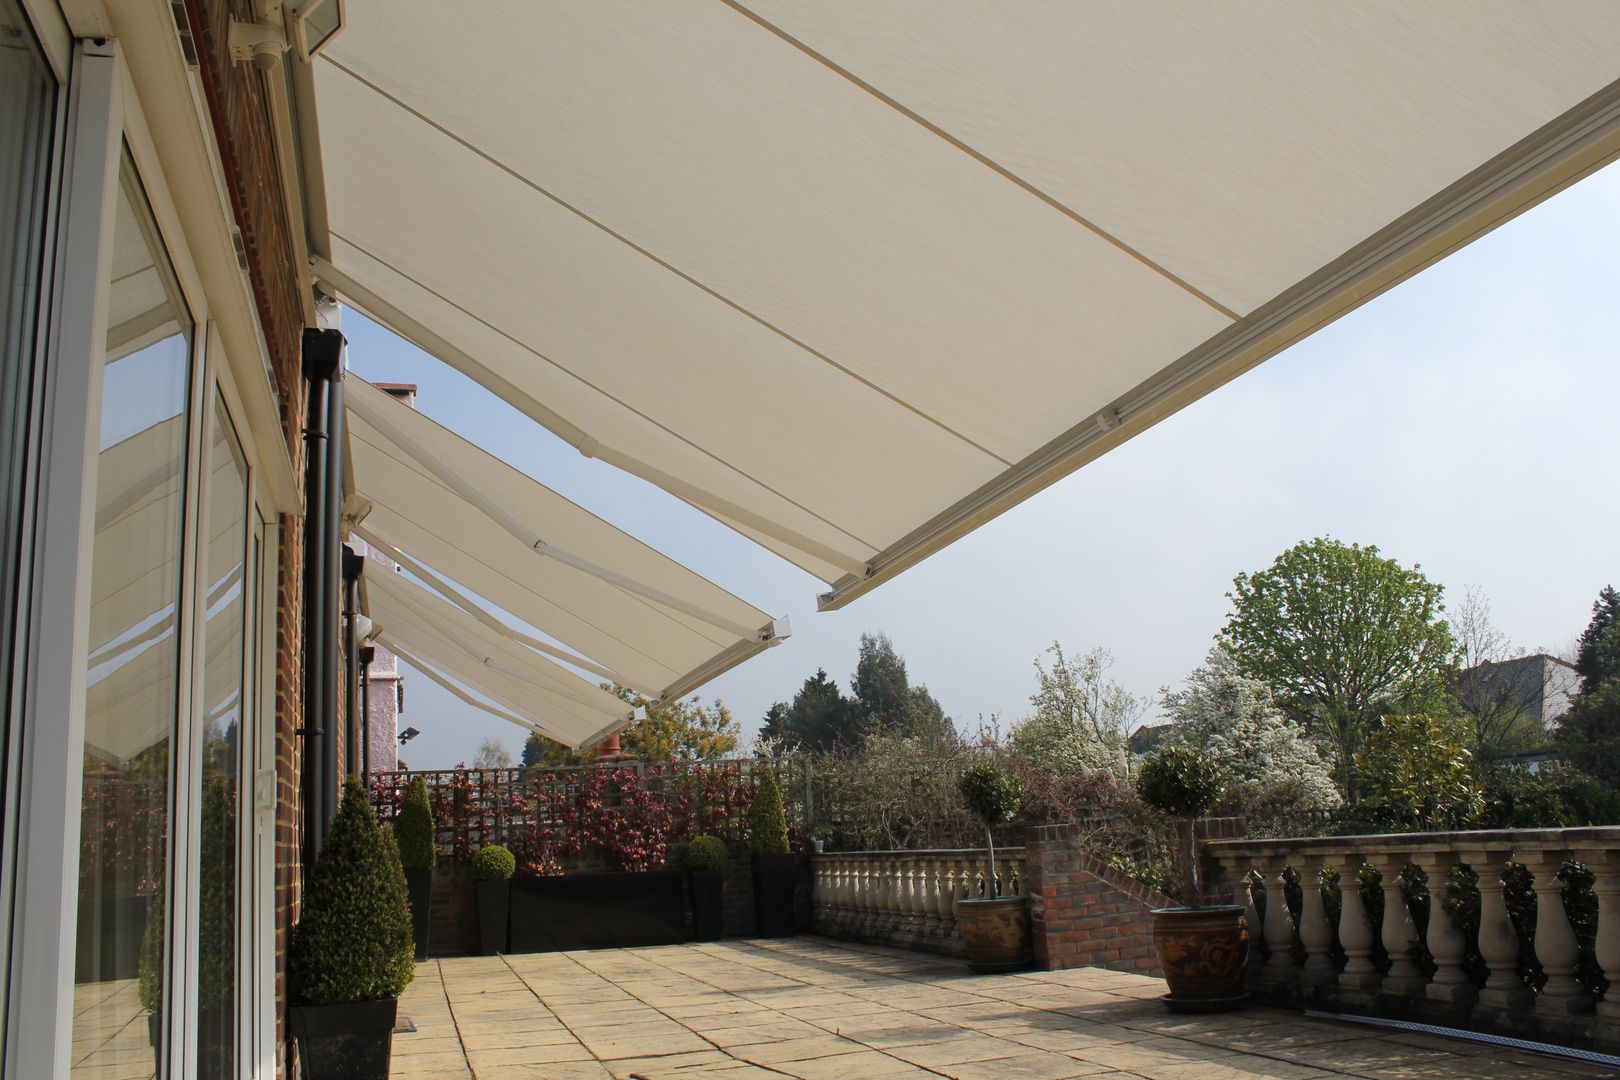 Patio Awning Installation in London. homify Patios patio,awning,terrace,canopy,garden,alfresco,shading